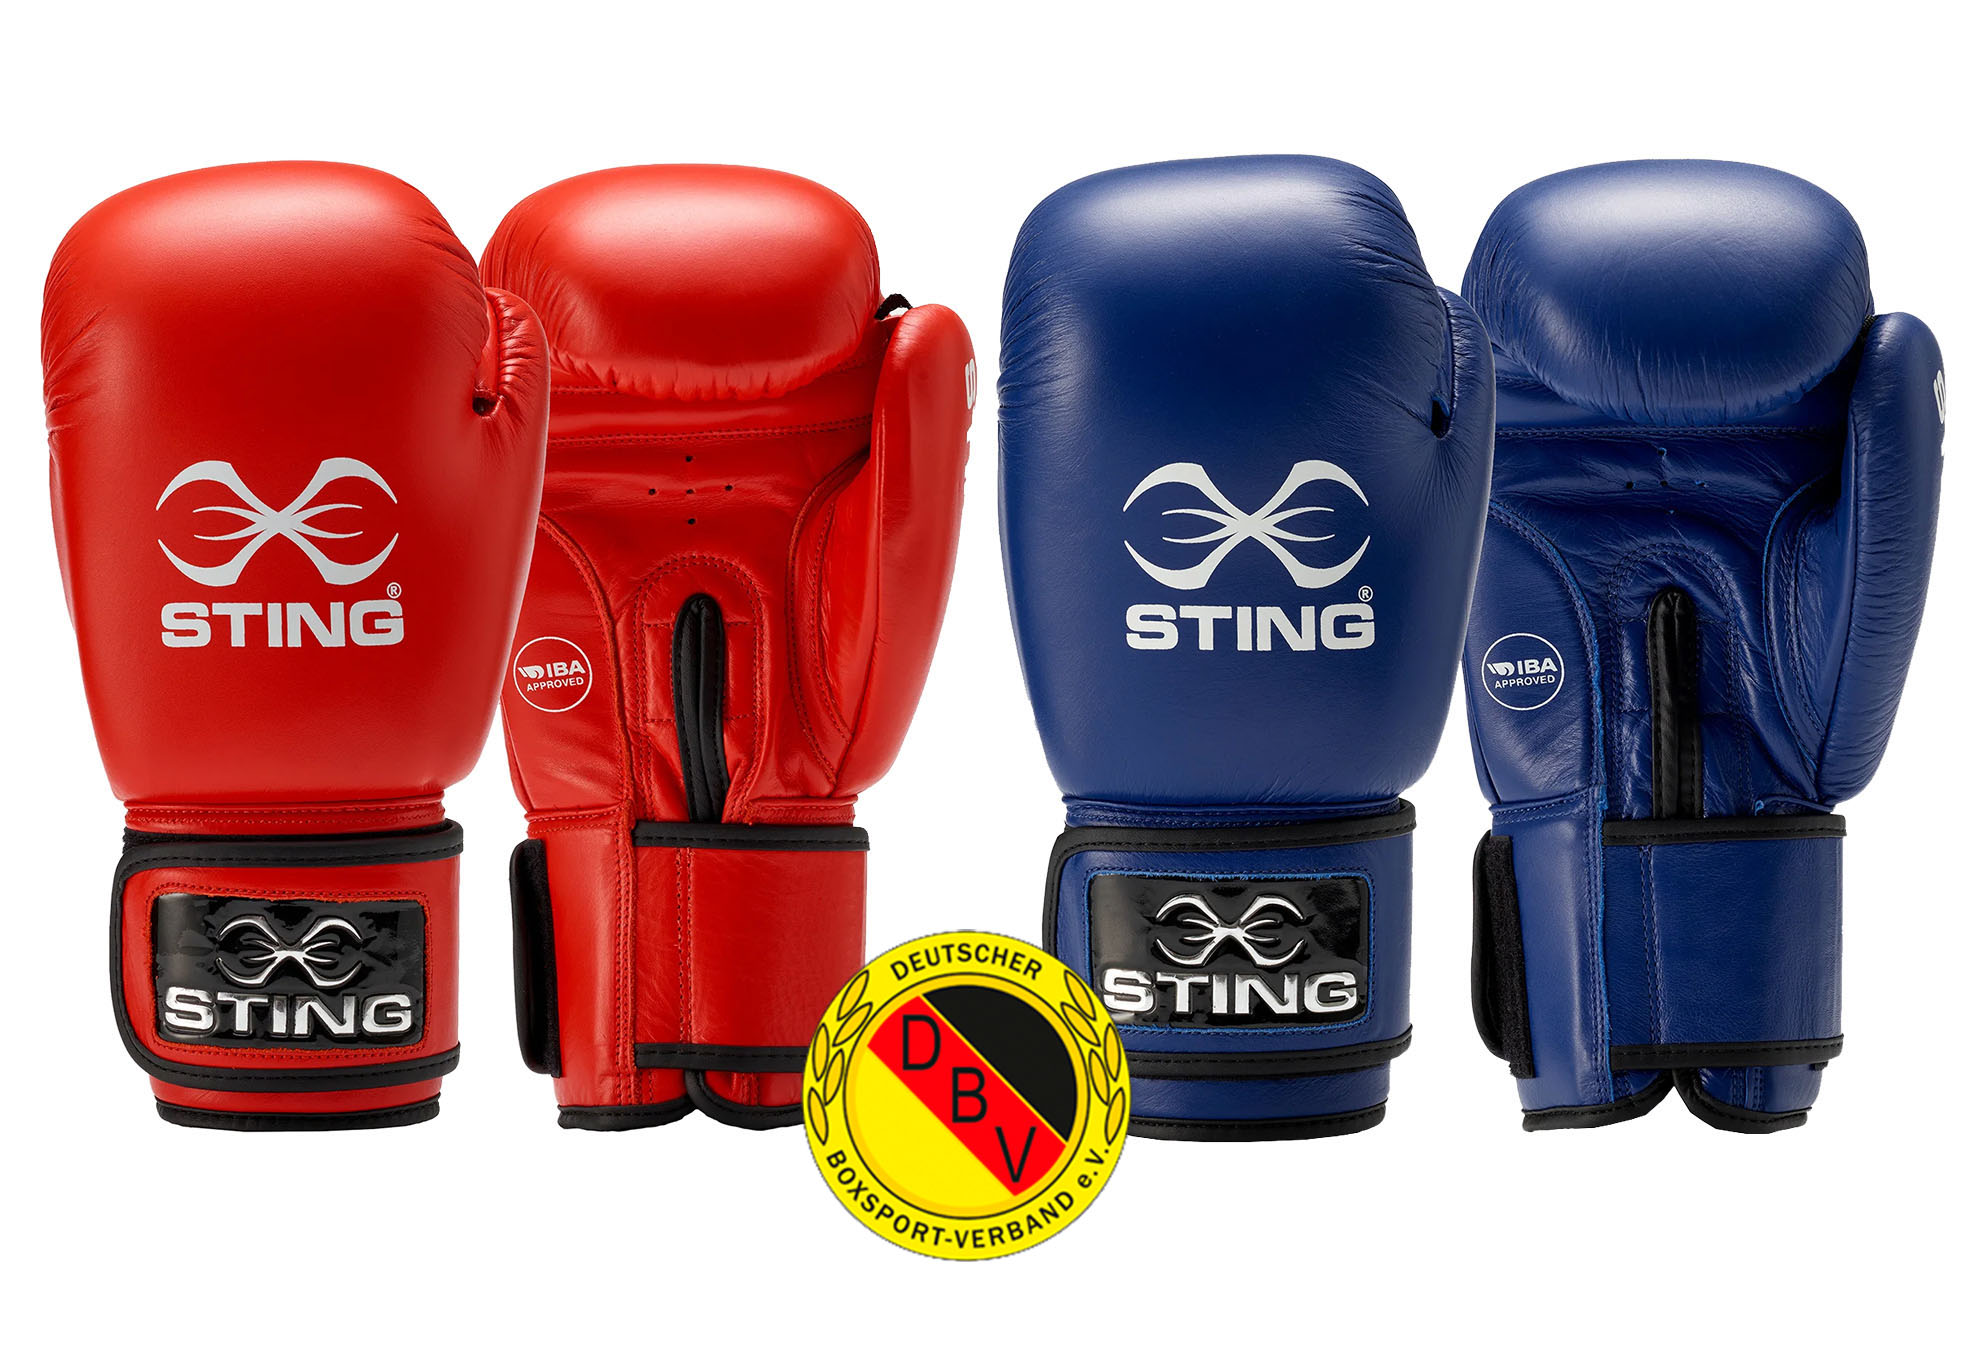 STING IBA/DBV Boxhandschuh Competition